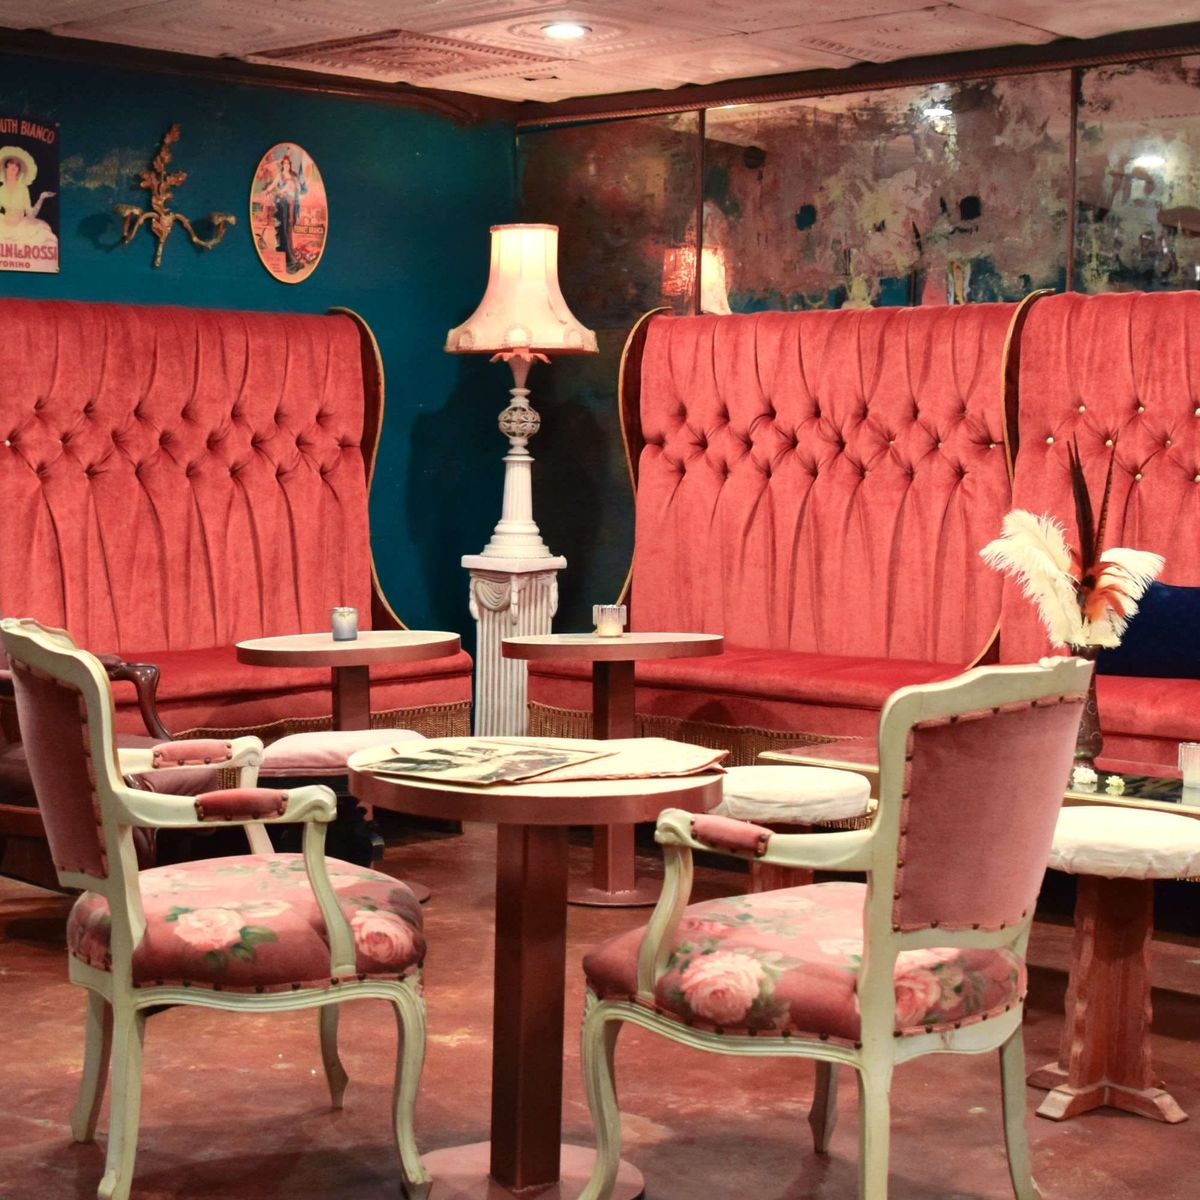 15 of the Most Fashionable Red Restaurants and Bars for Galentine’s Day